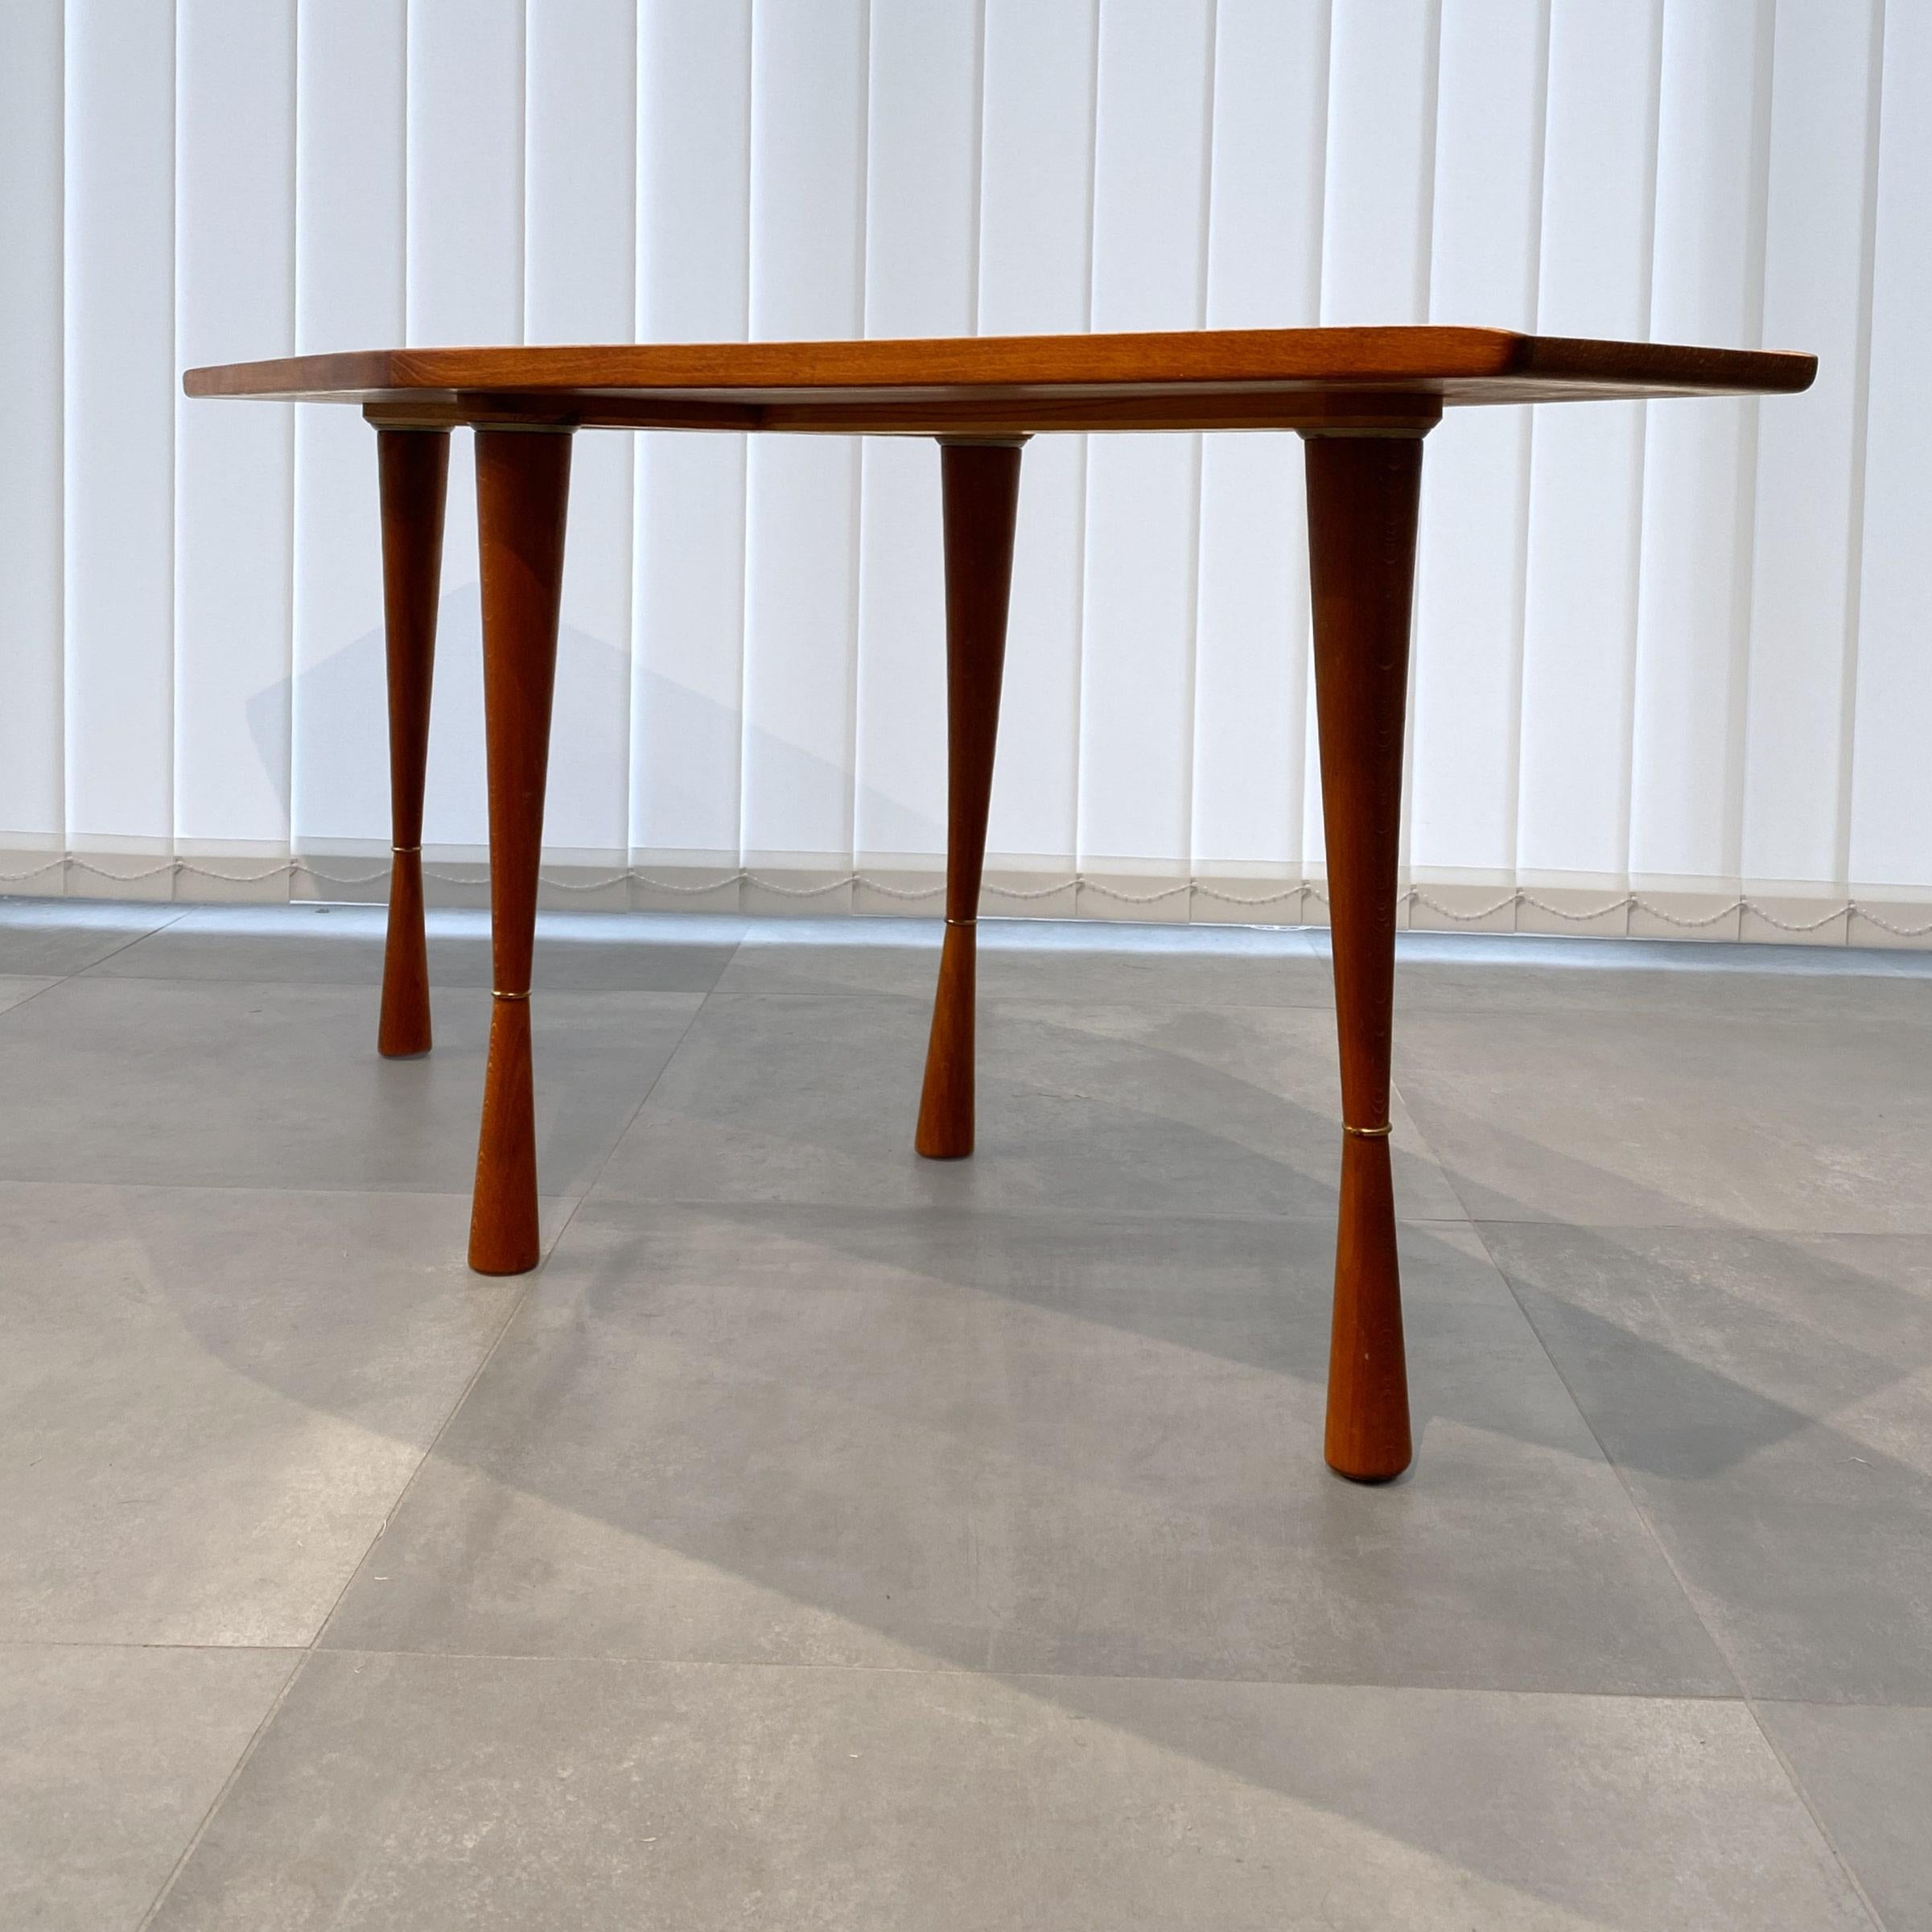 Joinery Swedish Modern coffee table with brass inlays, Sweden, 1940s For Sale